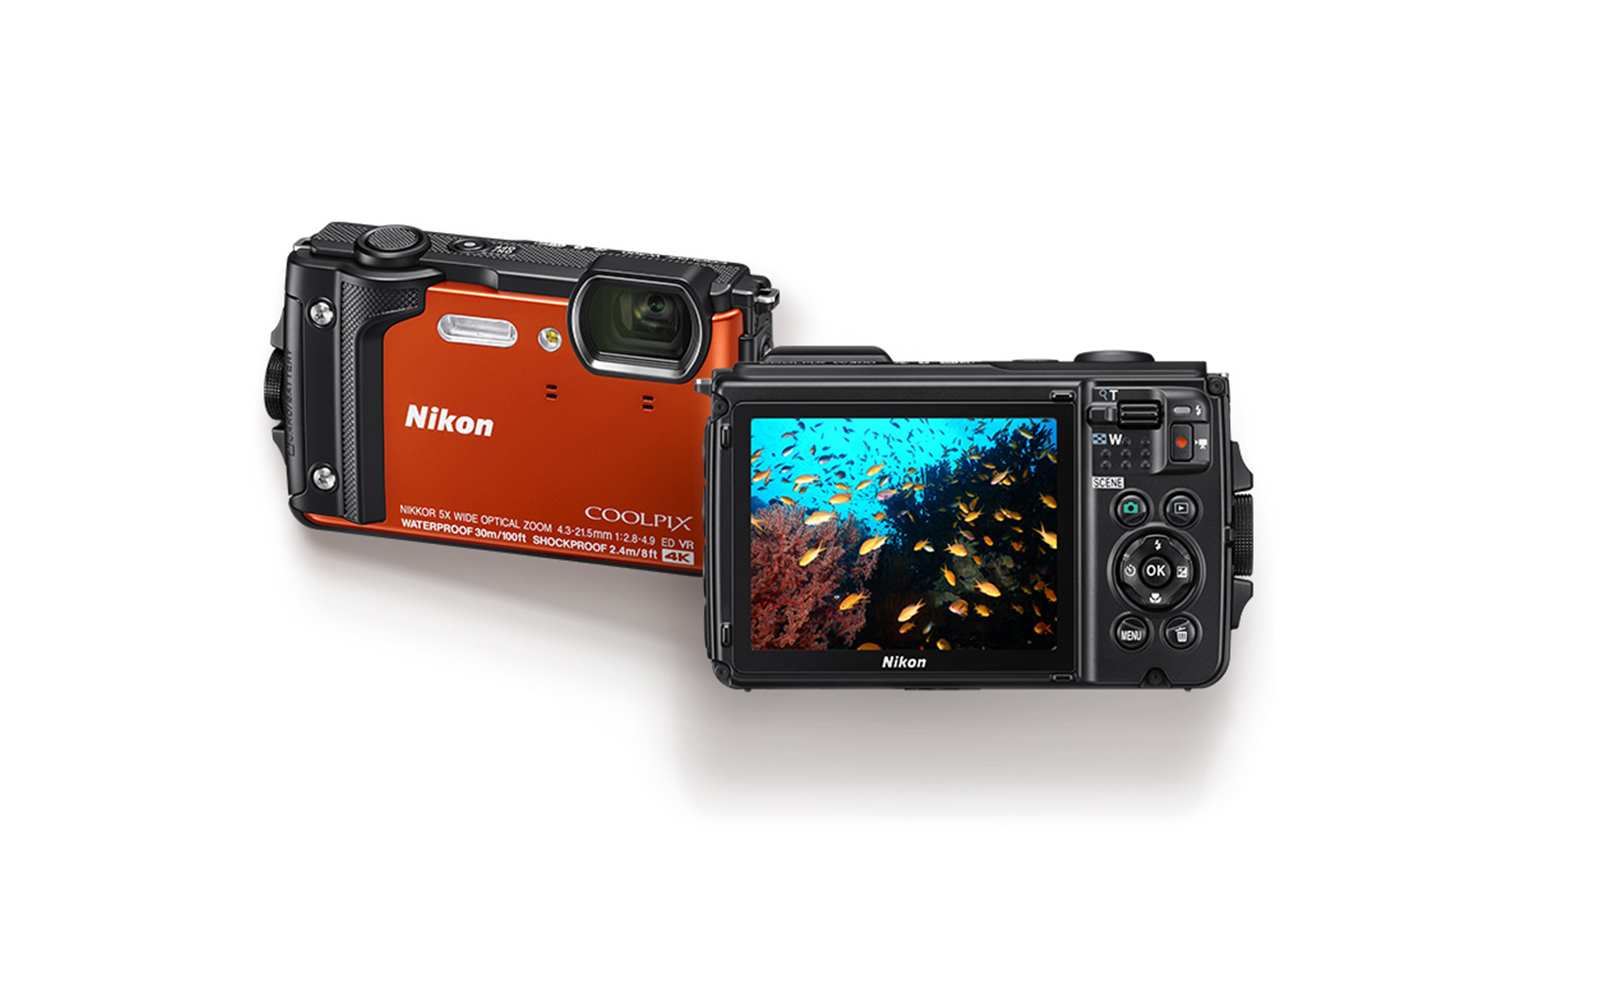 Nikon Coolpix W300 Review: An Adventure-Proof Camera for